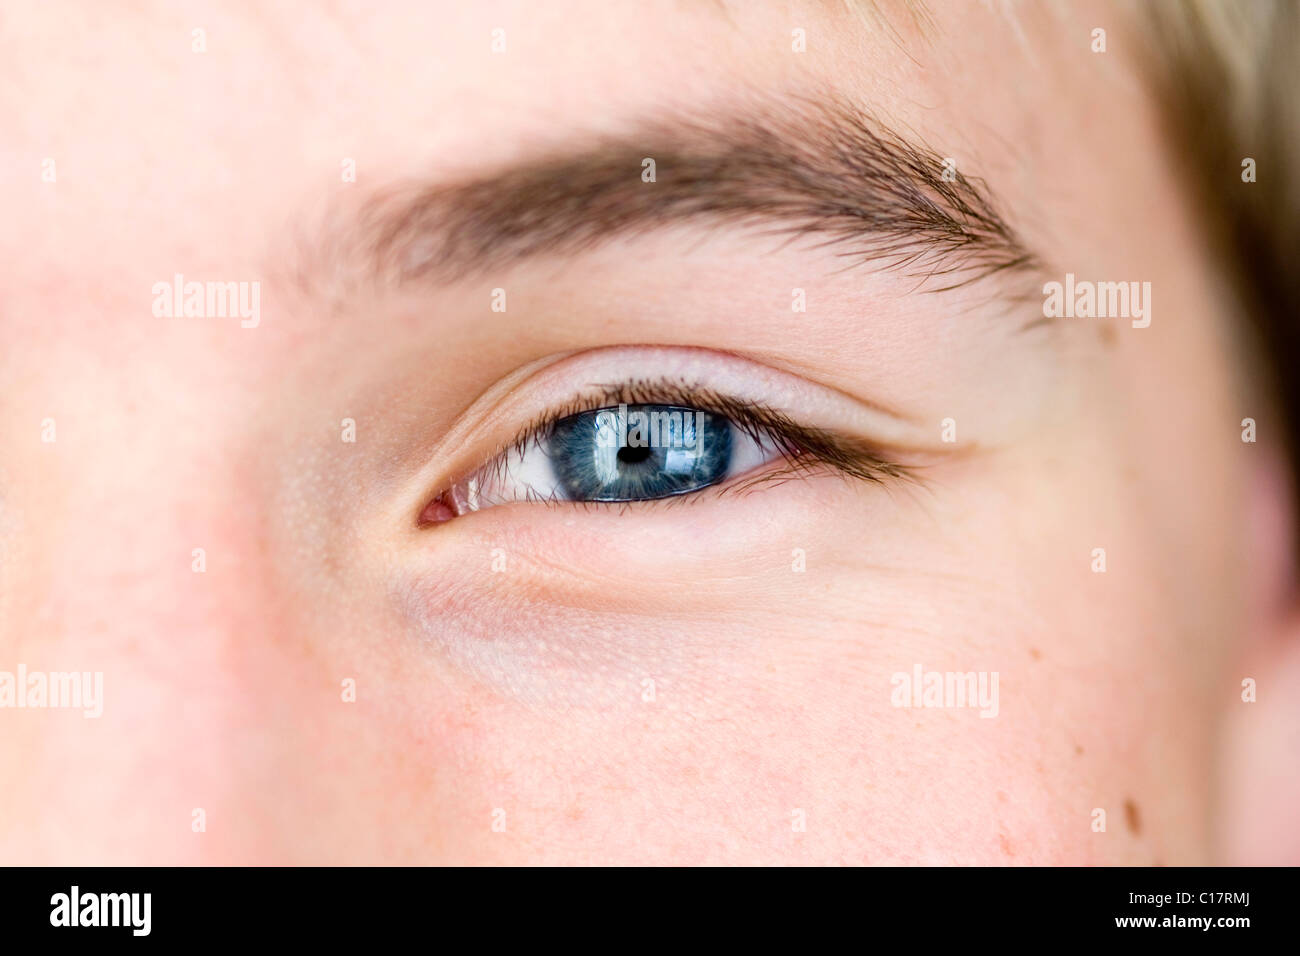 Eye, blue color of a young man Stock Photo